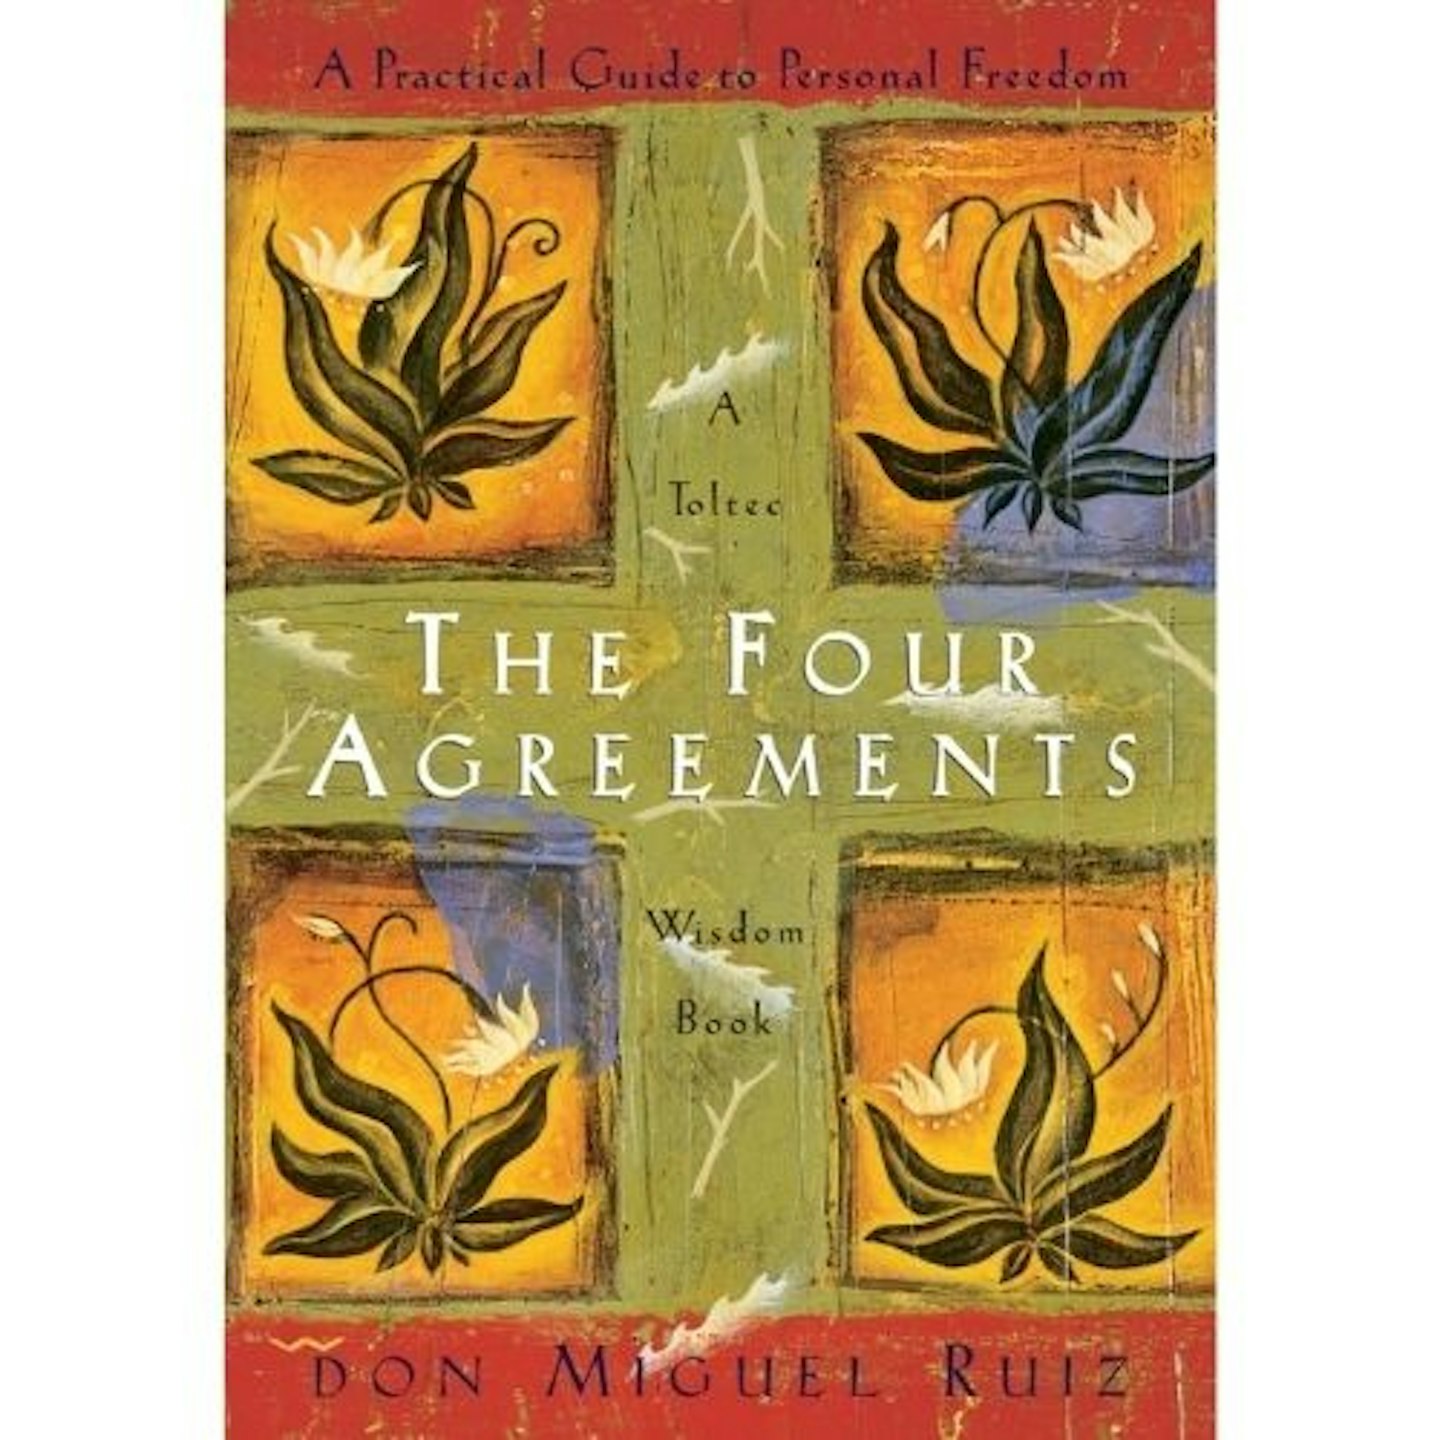 best wellbeing books - The Four Agreements: Practical Guide to Personal Freedom by Don Miguel Ruiz